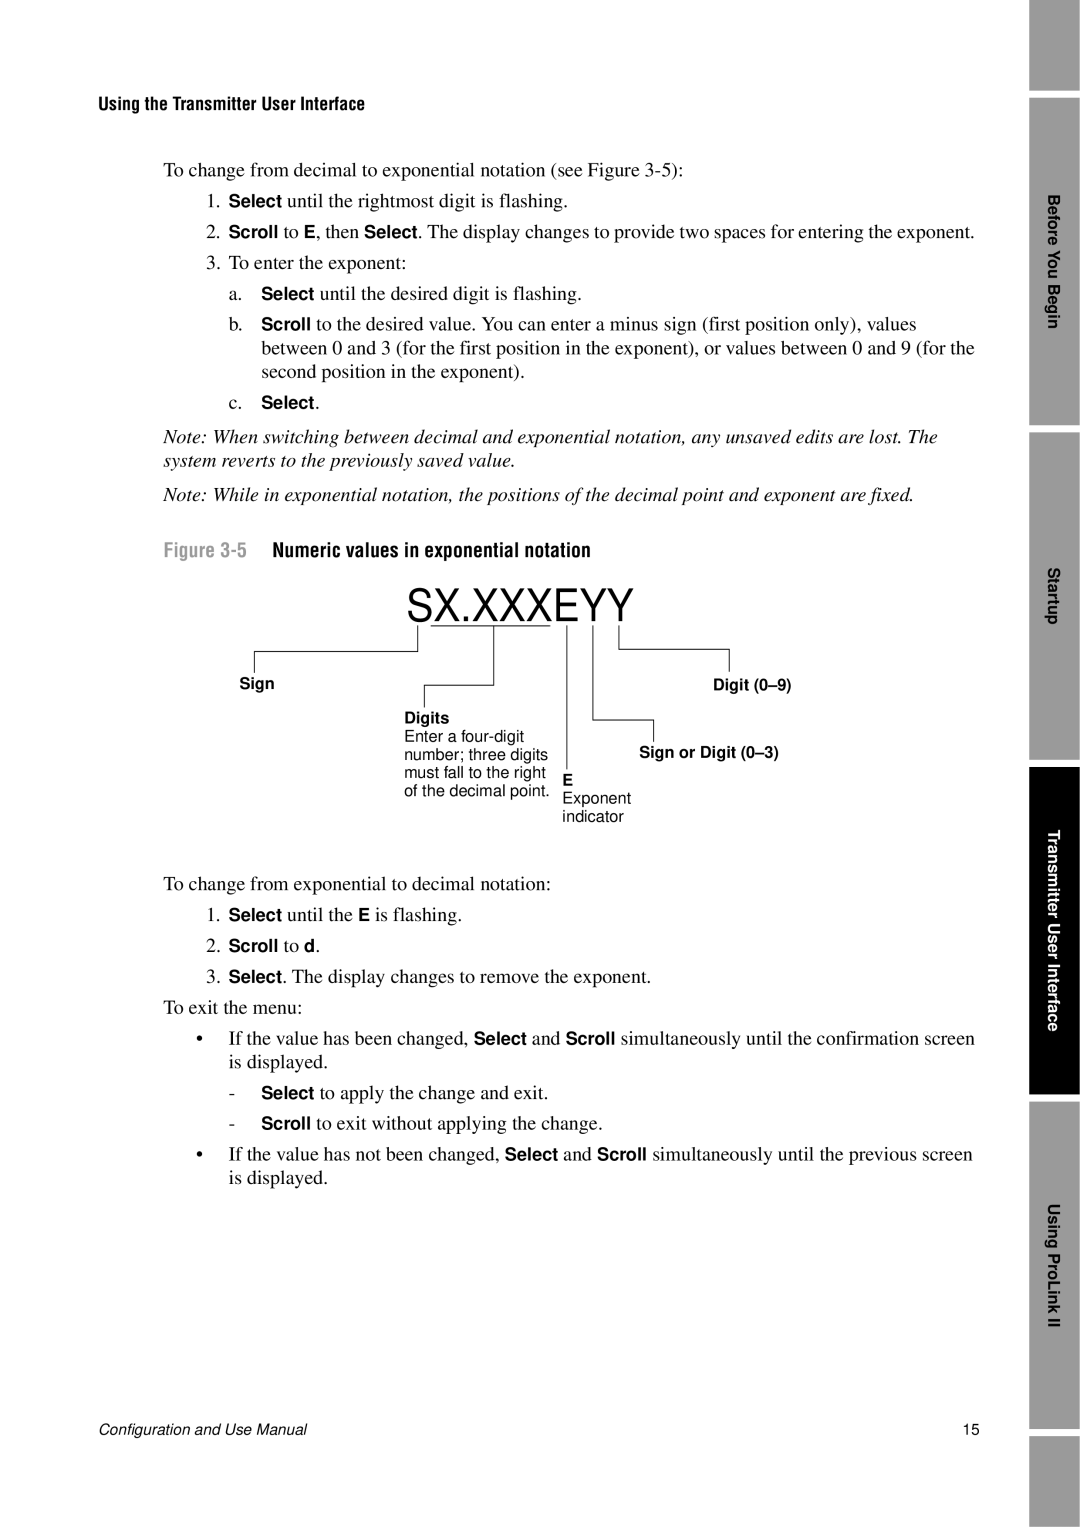 Emerson Process Management 2400S manual Sx.Xxxeyy, 5 Numeric values in exponential notation 